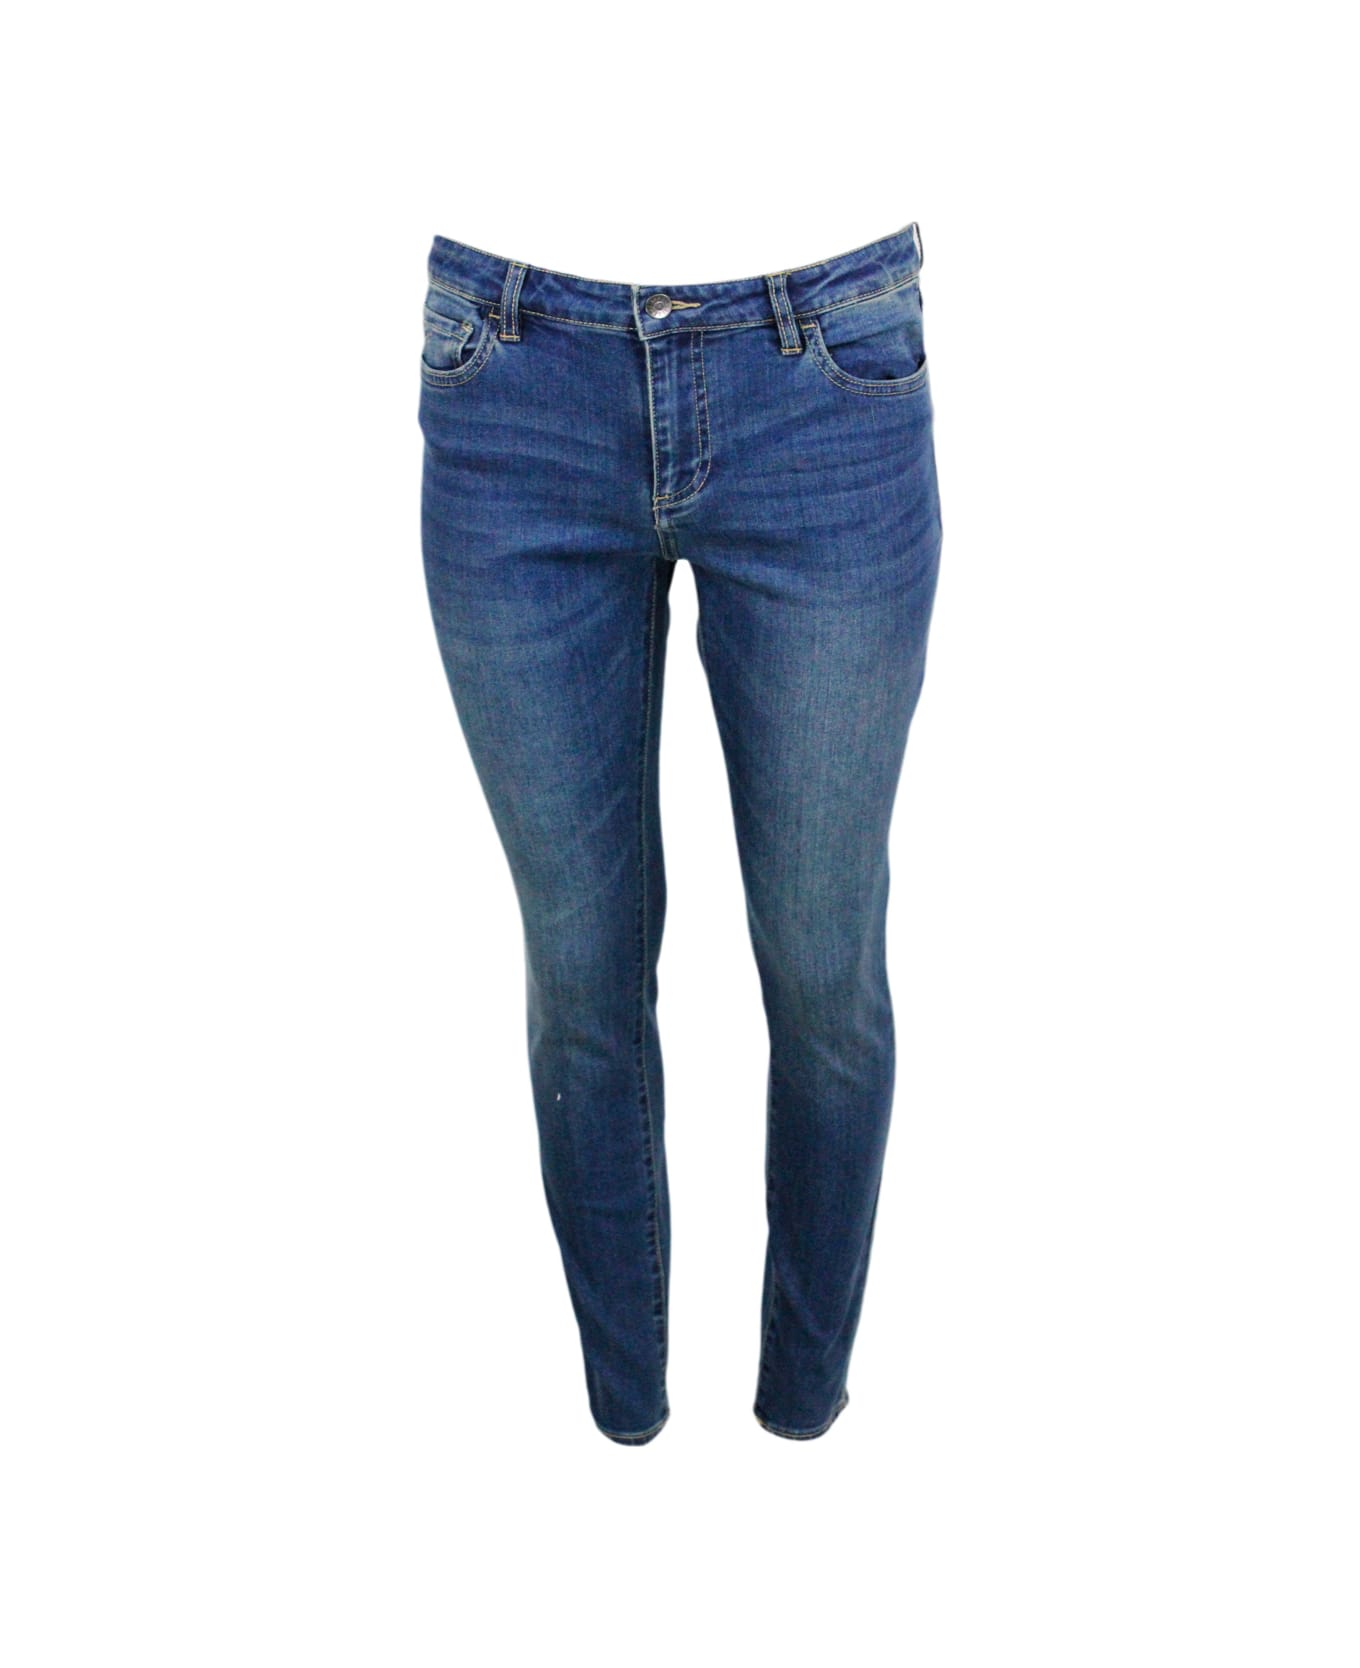 Armani Collezioni Super Skynny Mid Rise Jeans Trousers In Stretch Denim With Logo On The Back Pocket - Denim